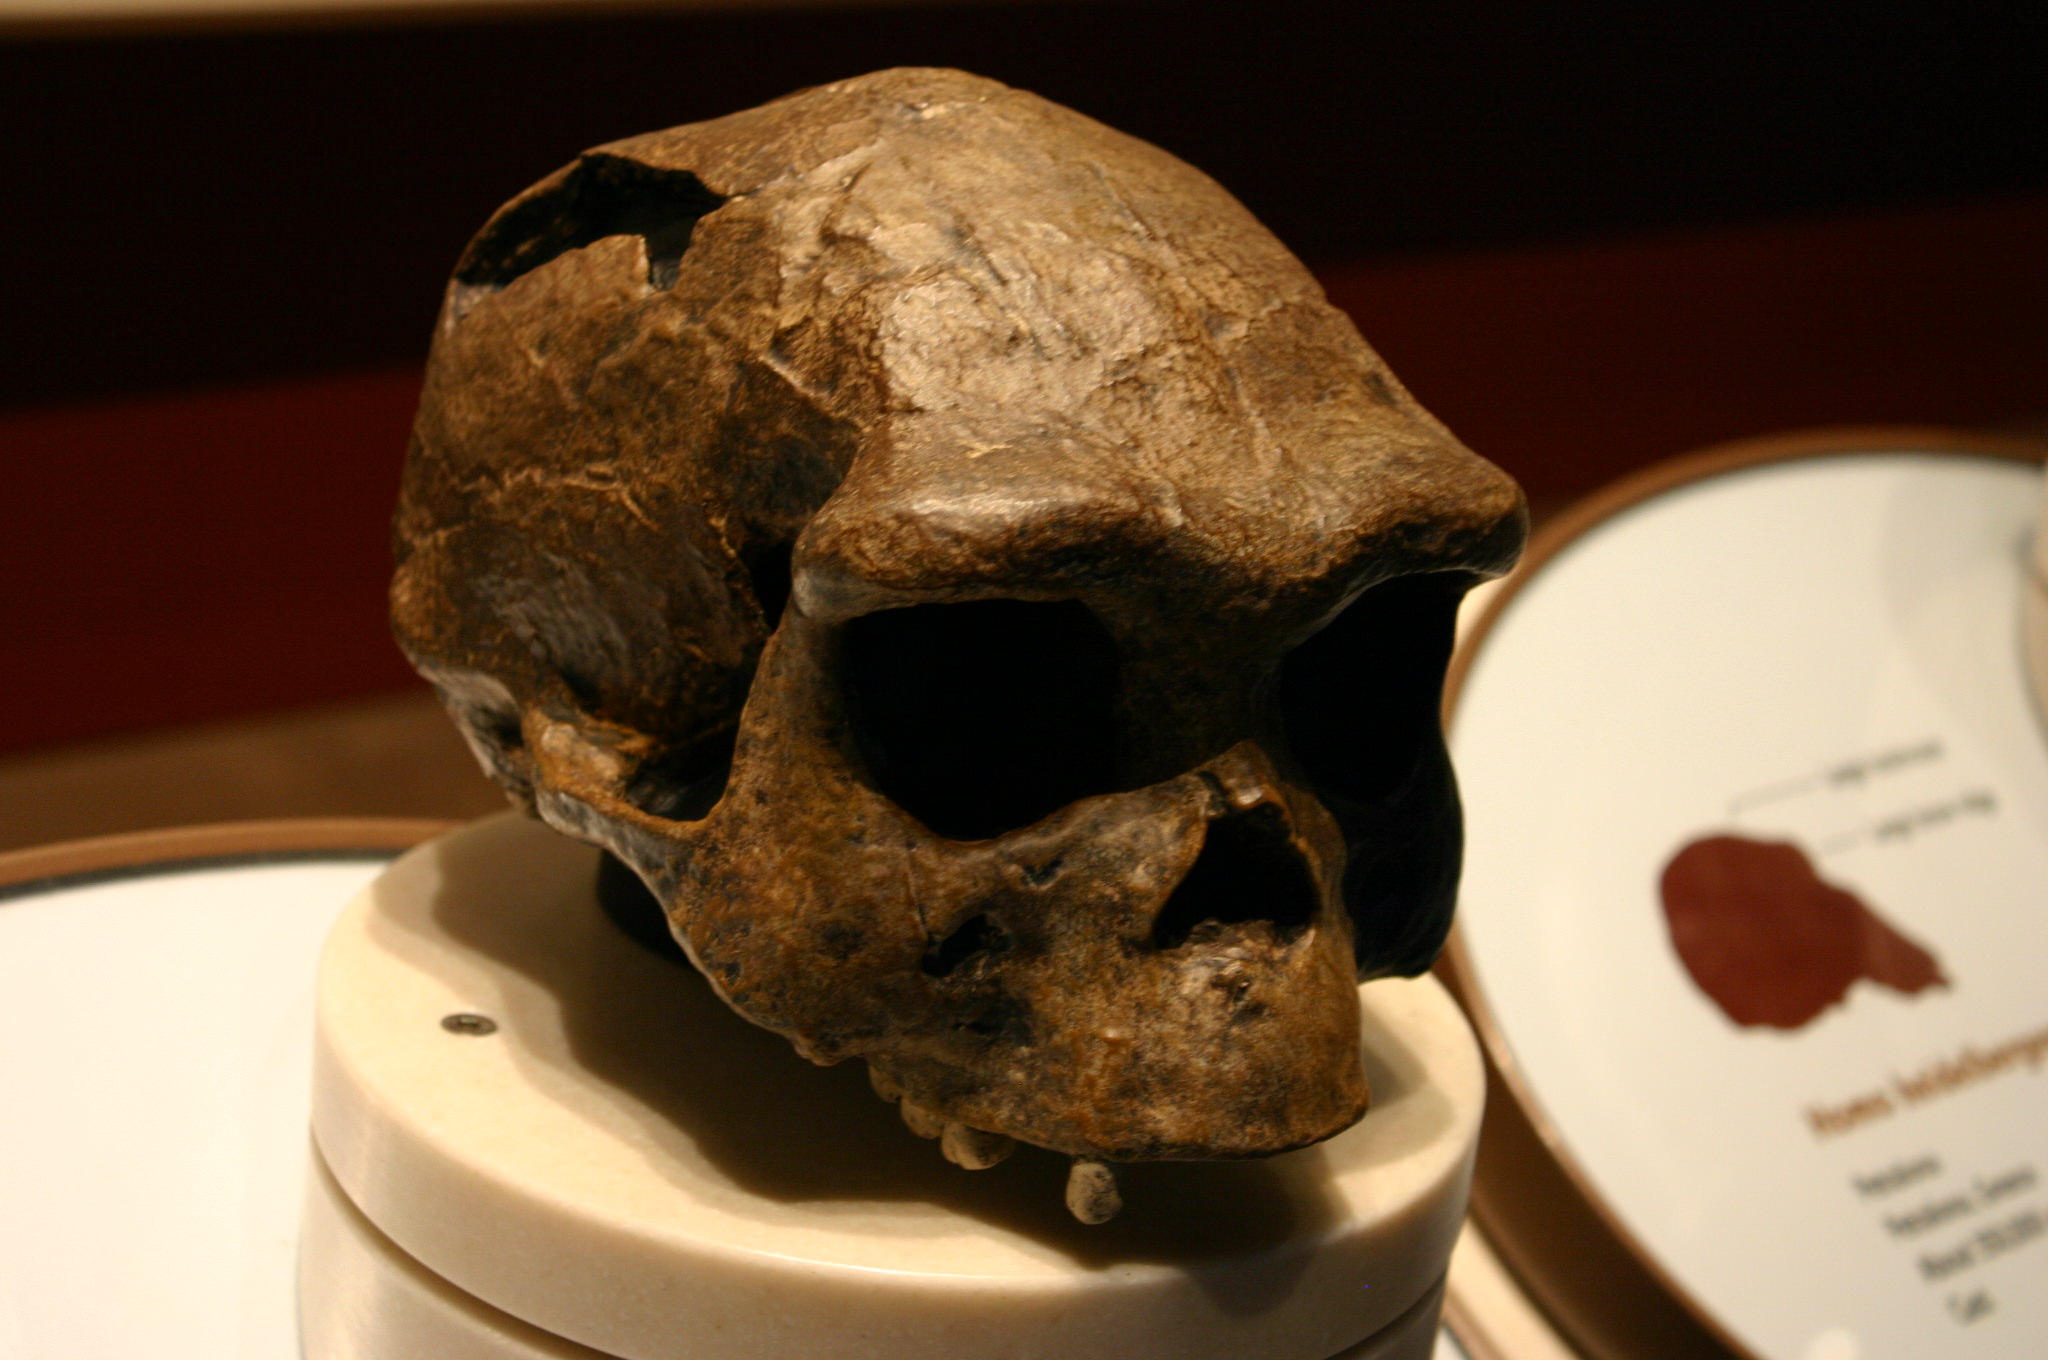 The skeleton from the Sima de los Huesos cave has been assigned to an early human species known as Homo heidelbergensis. However, researchers say the skeletal structure is similar to that of Neanderthals - so much so that some say the Sima de los Huesos people were actually Neanderthals rather than representatives of Homo heidelbergensis.